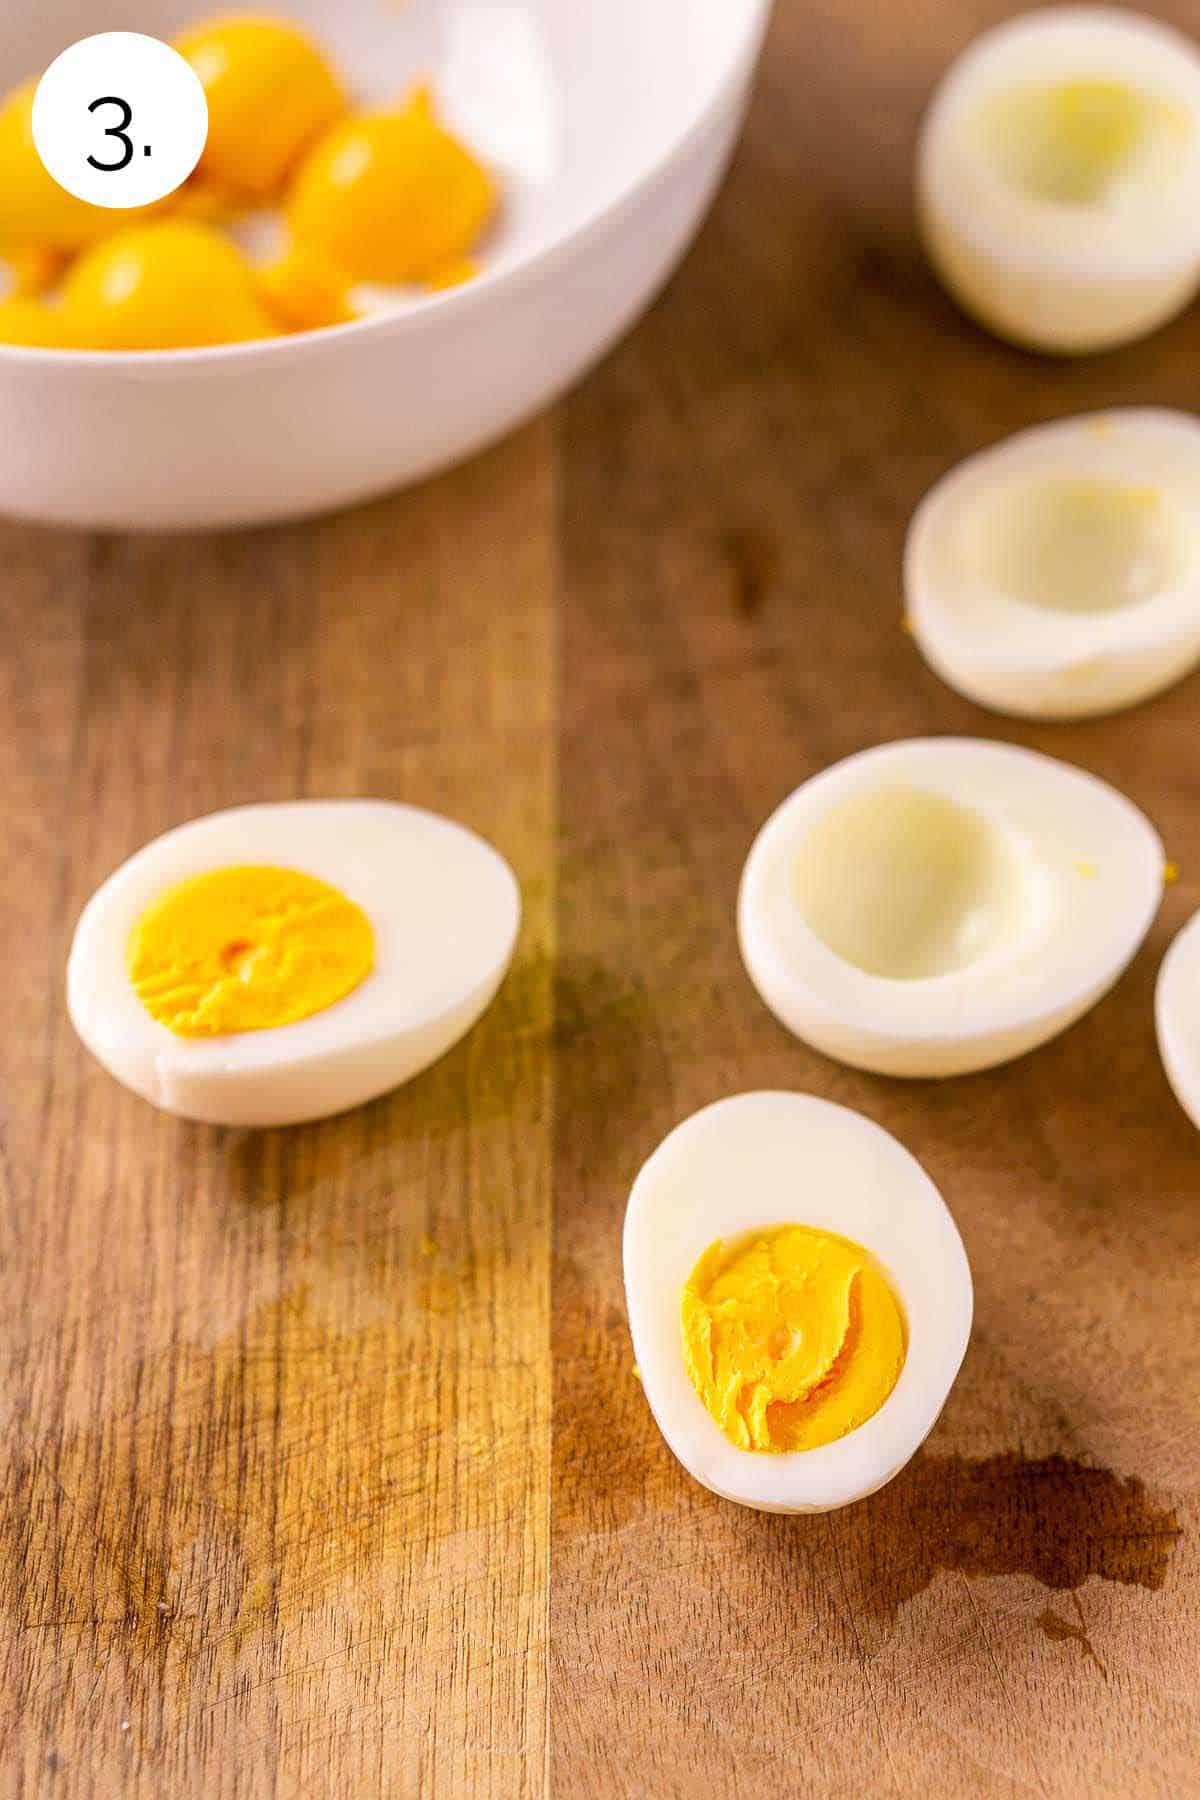 The steamed eggs cut in half on a brown cutting board with some of the egg yolks removed and place in a small white bowl.